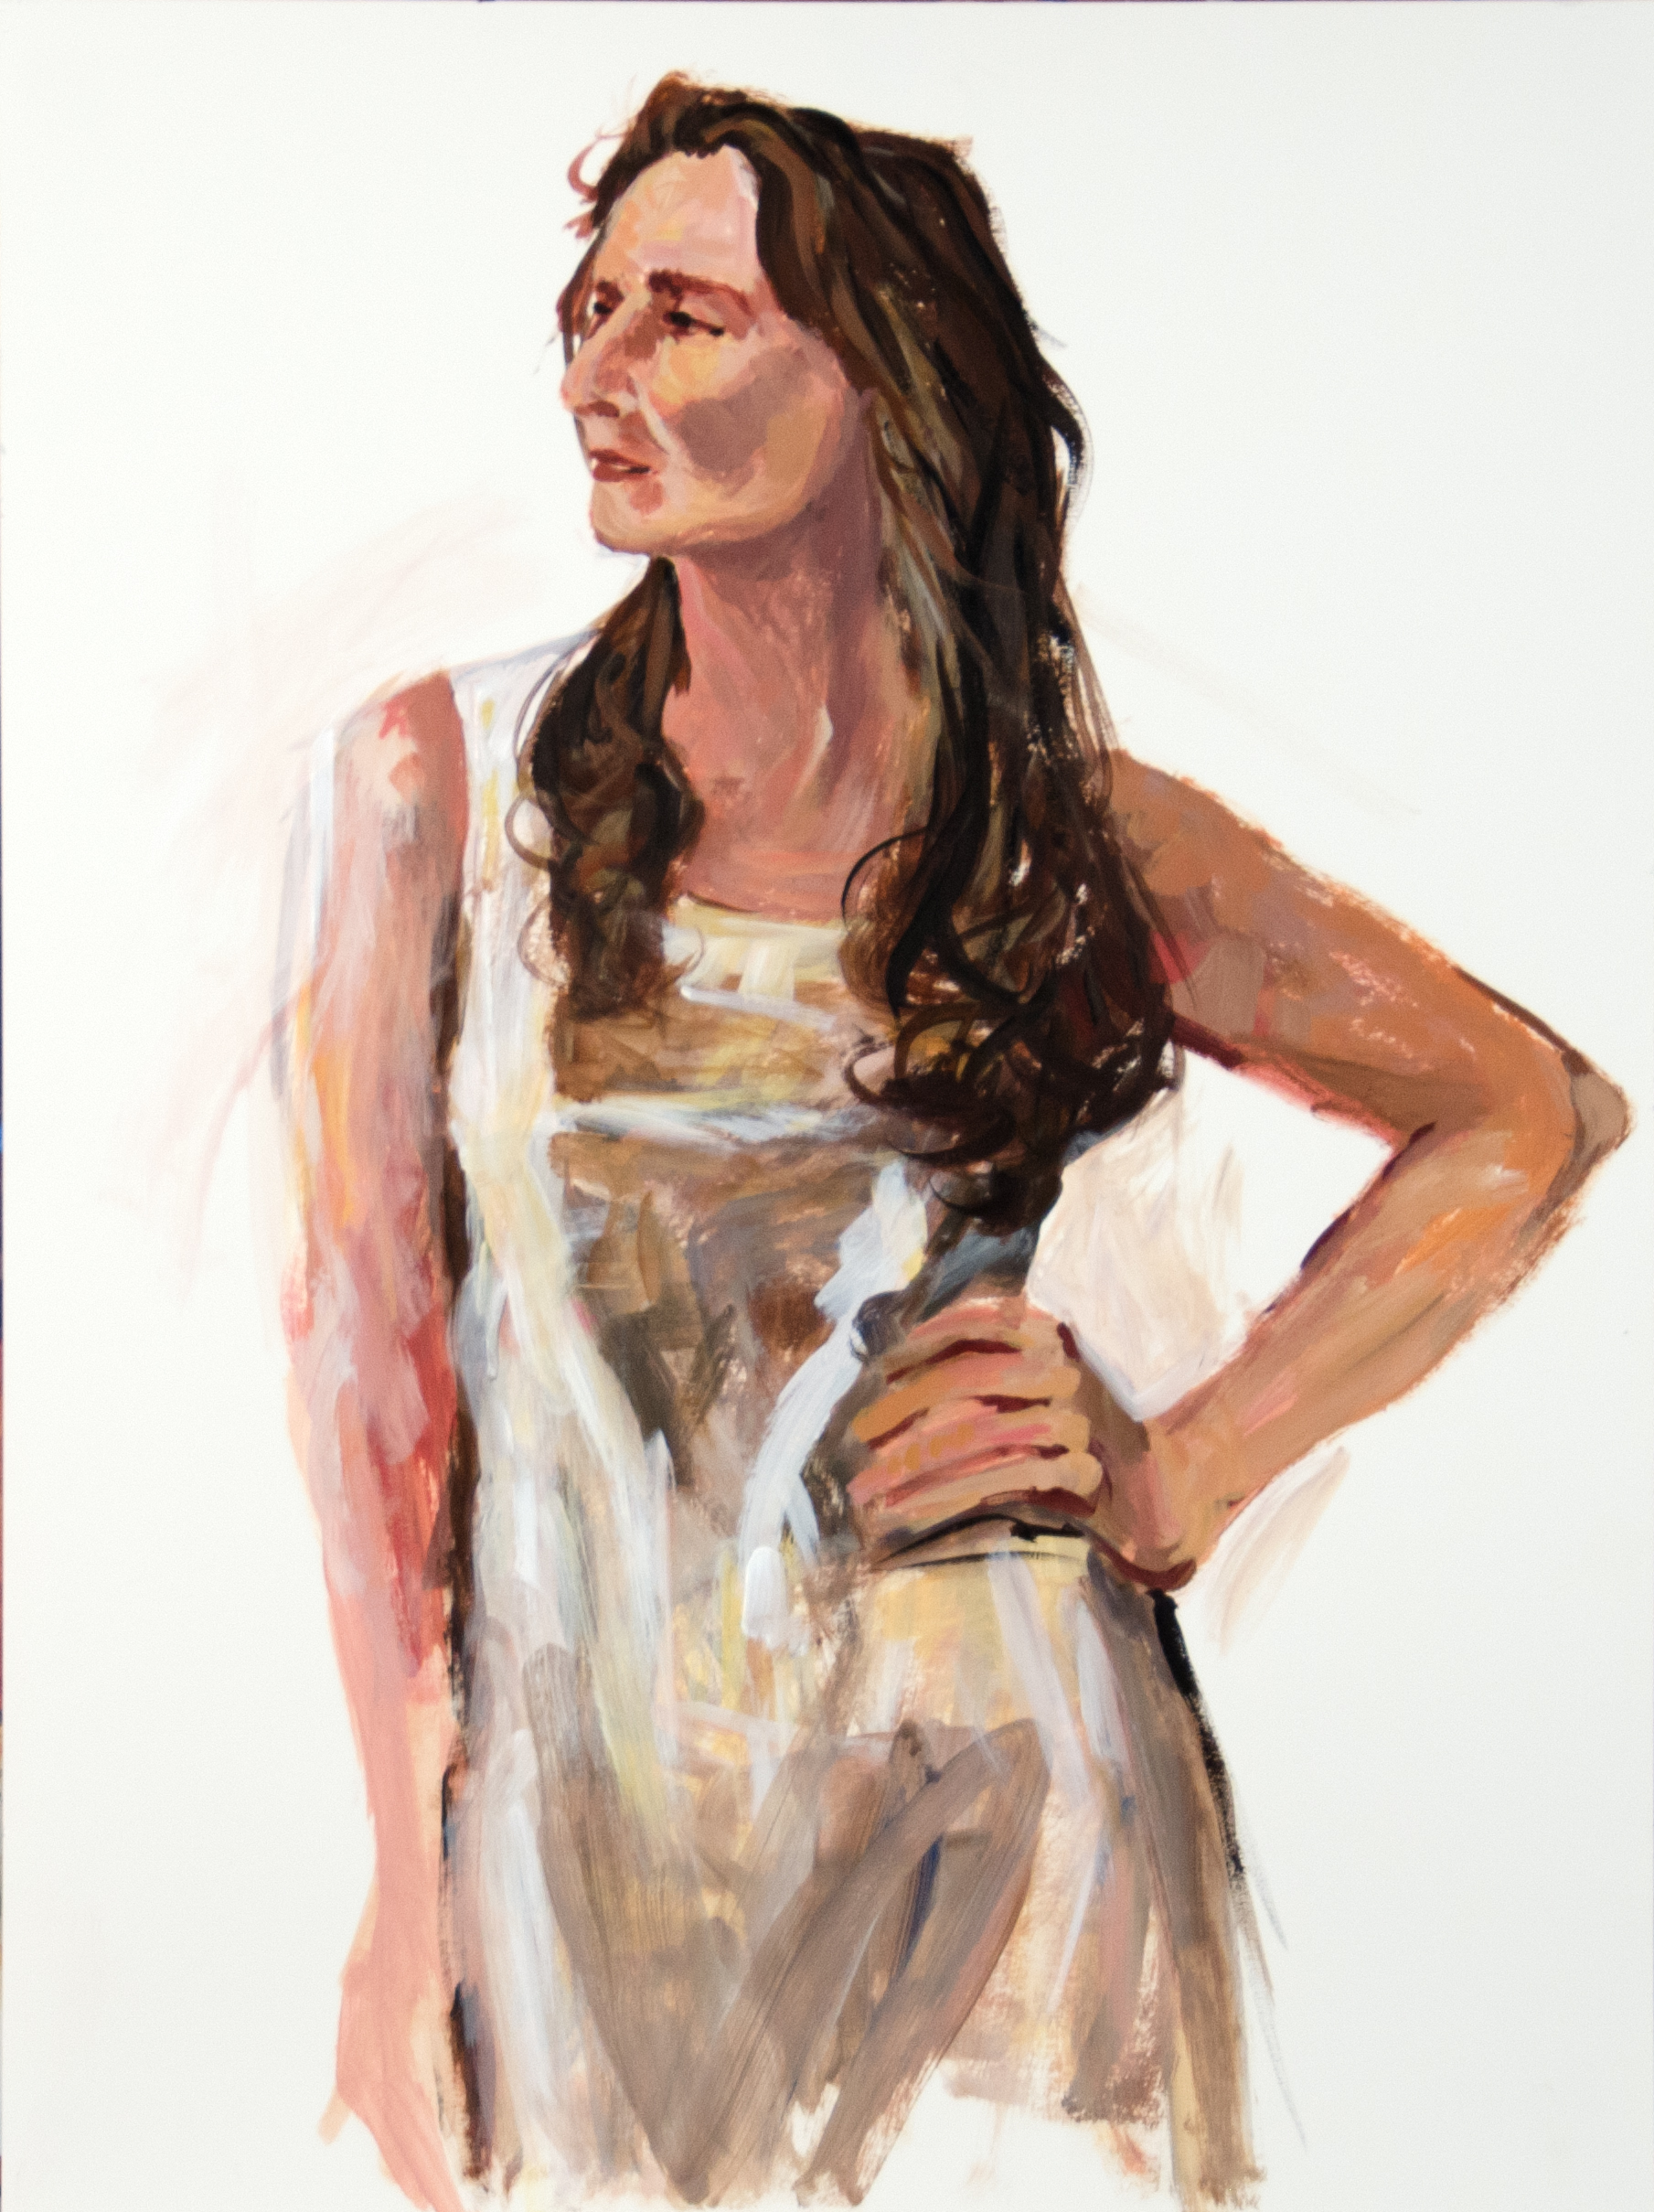 Sassy In A Nightgown, Acrylic on Paper, 24"x30"